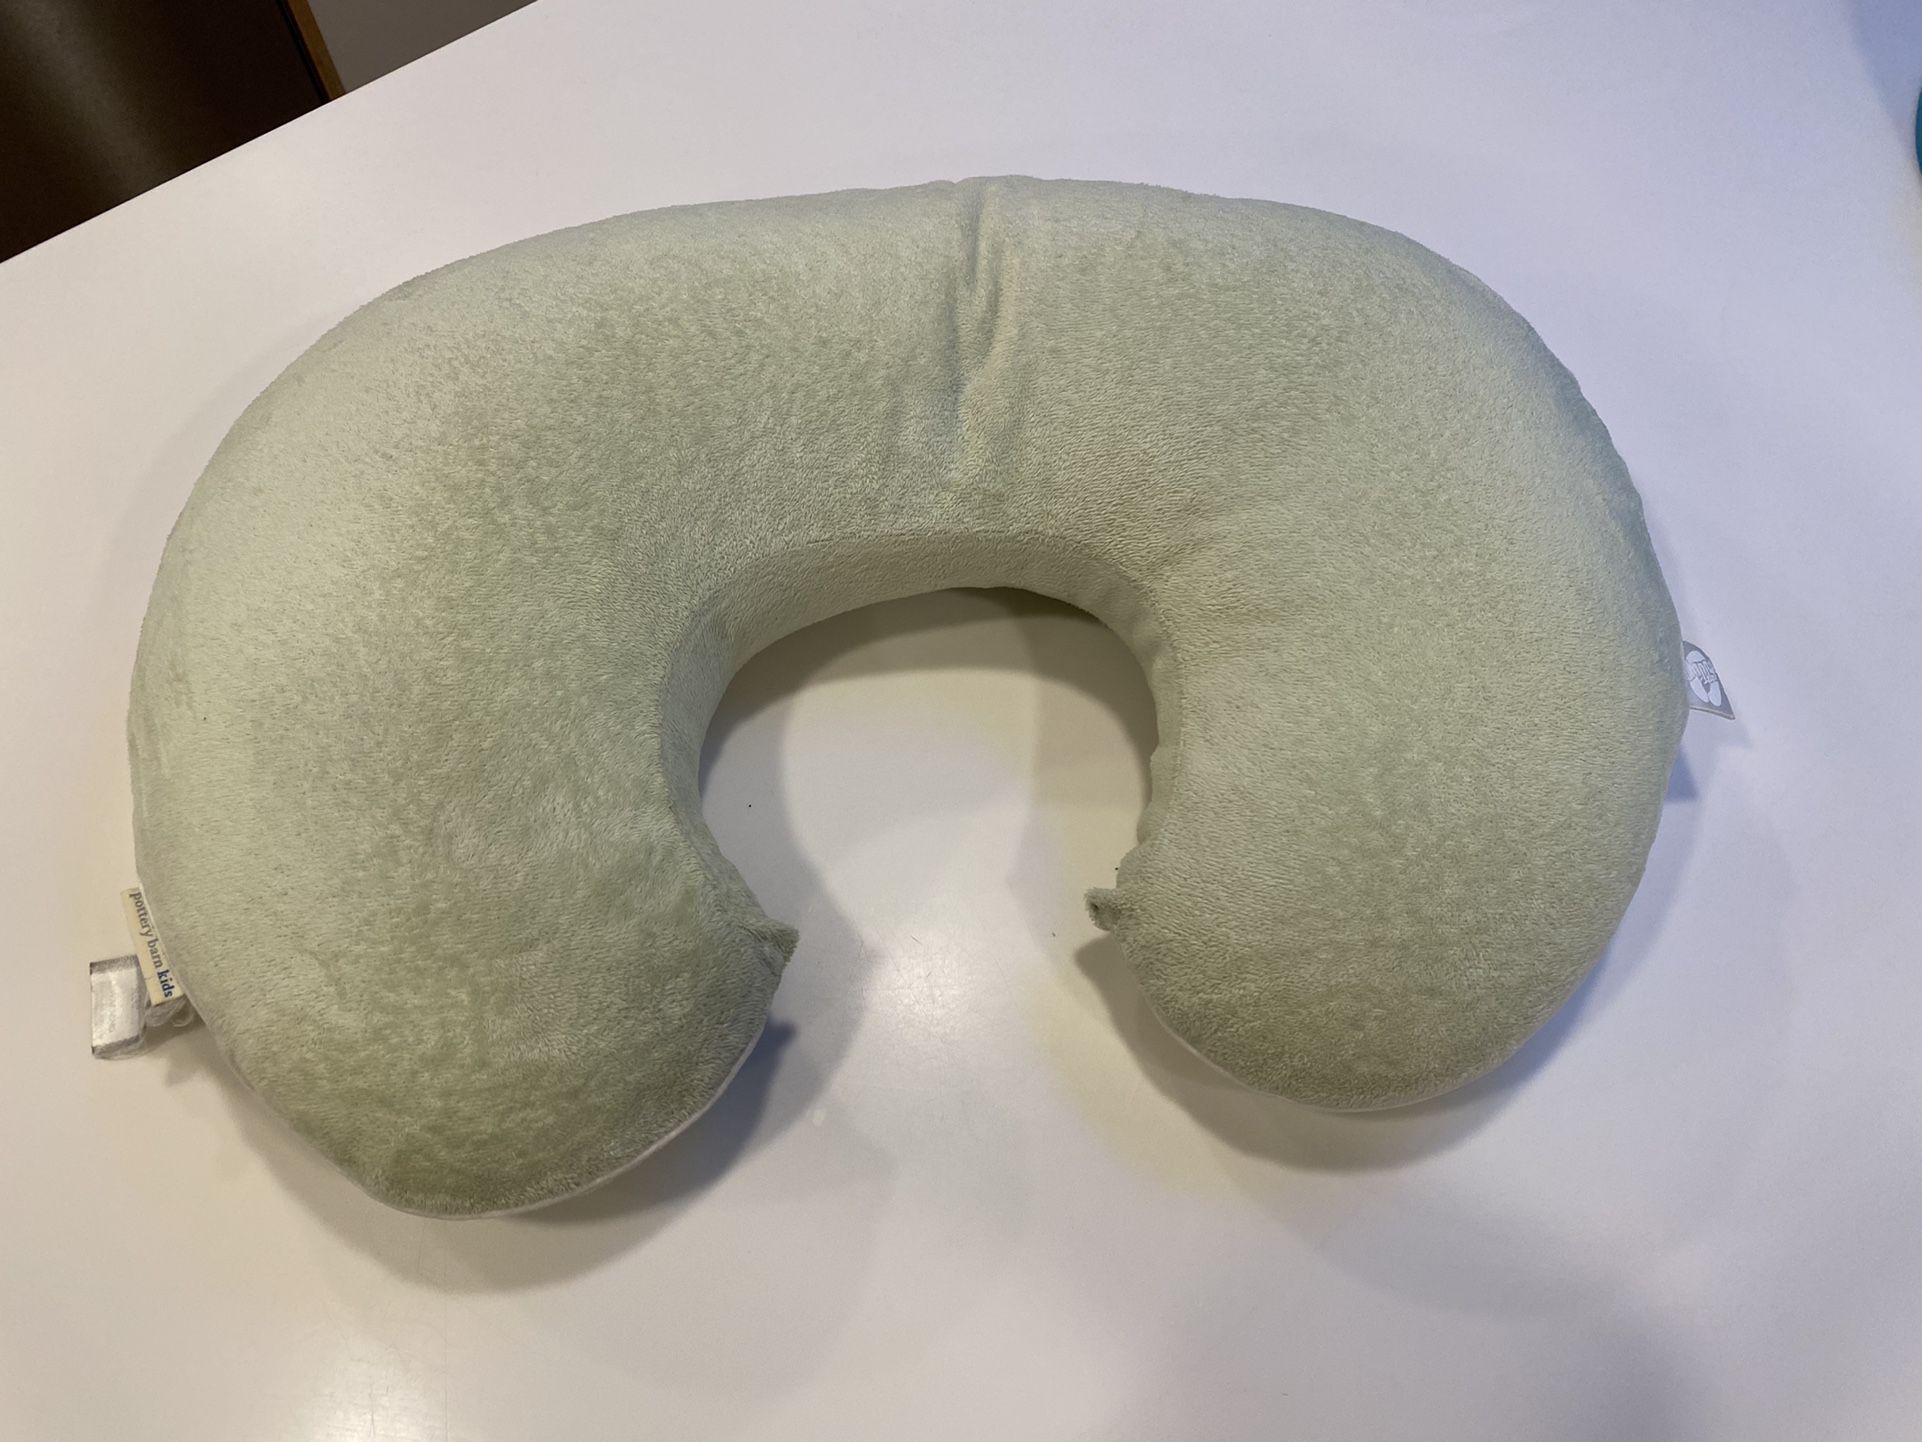 Boppy Pillow And Cover